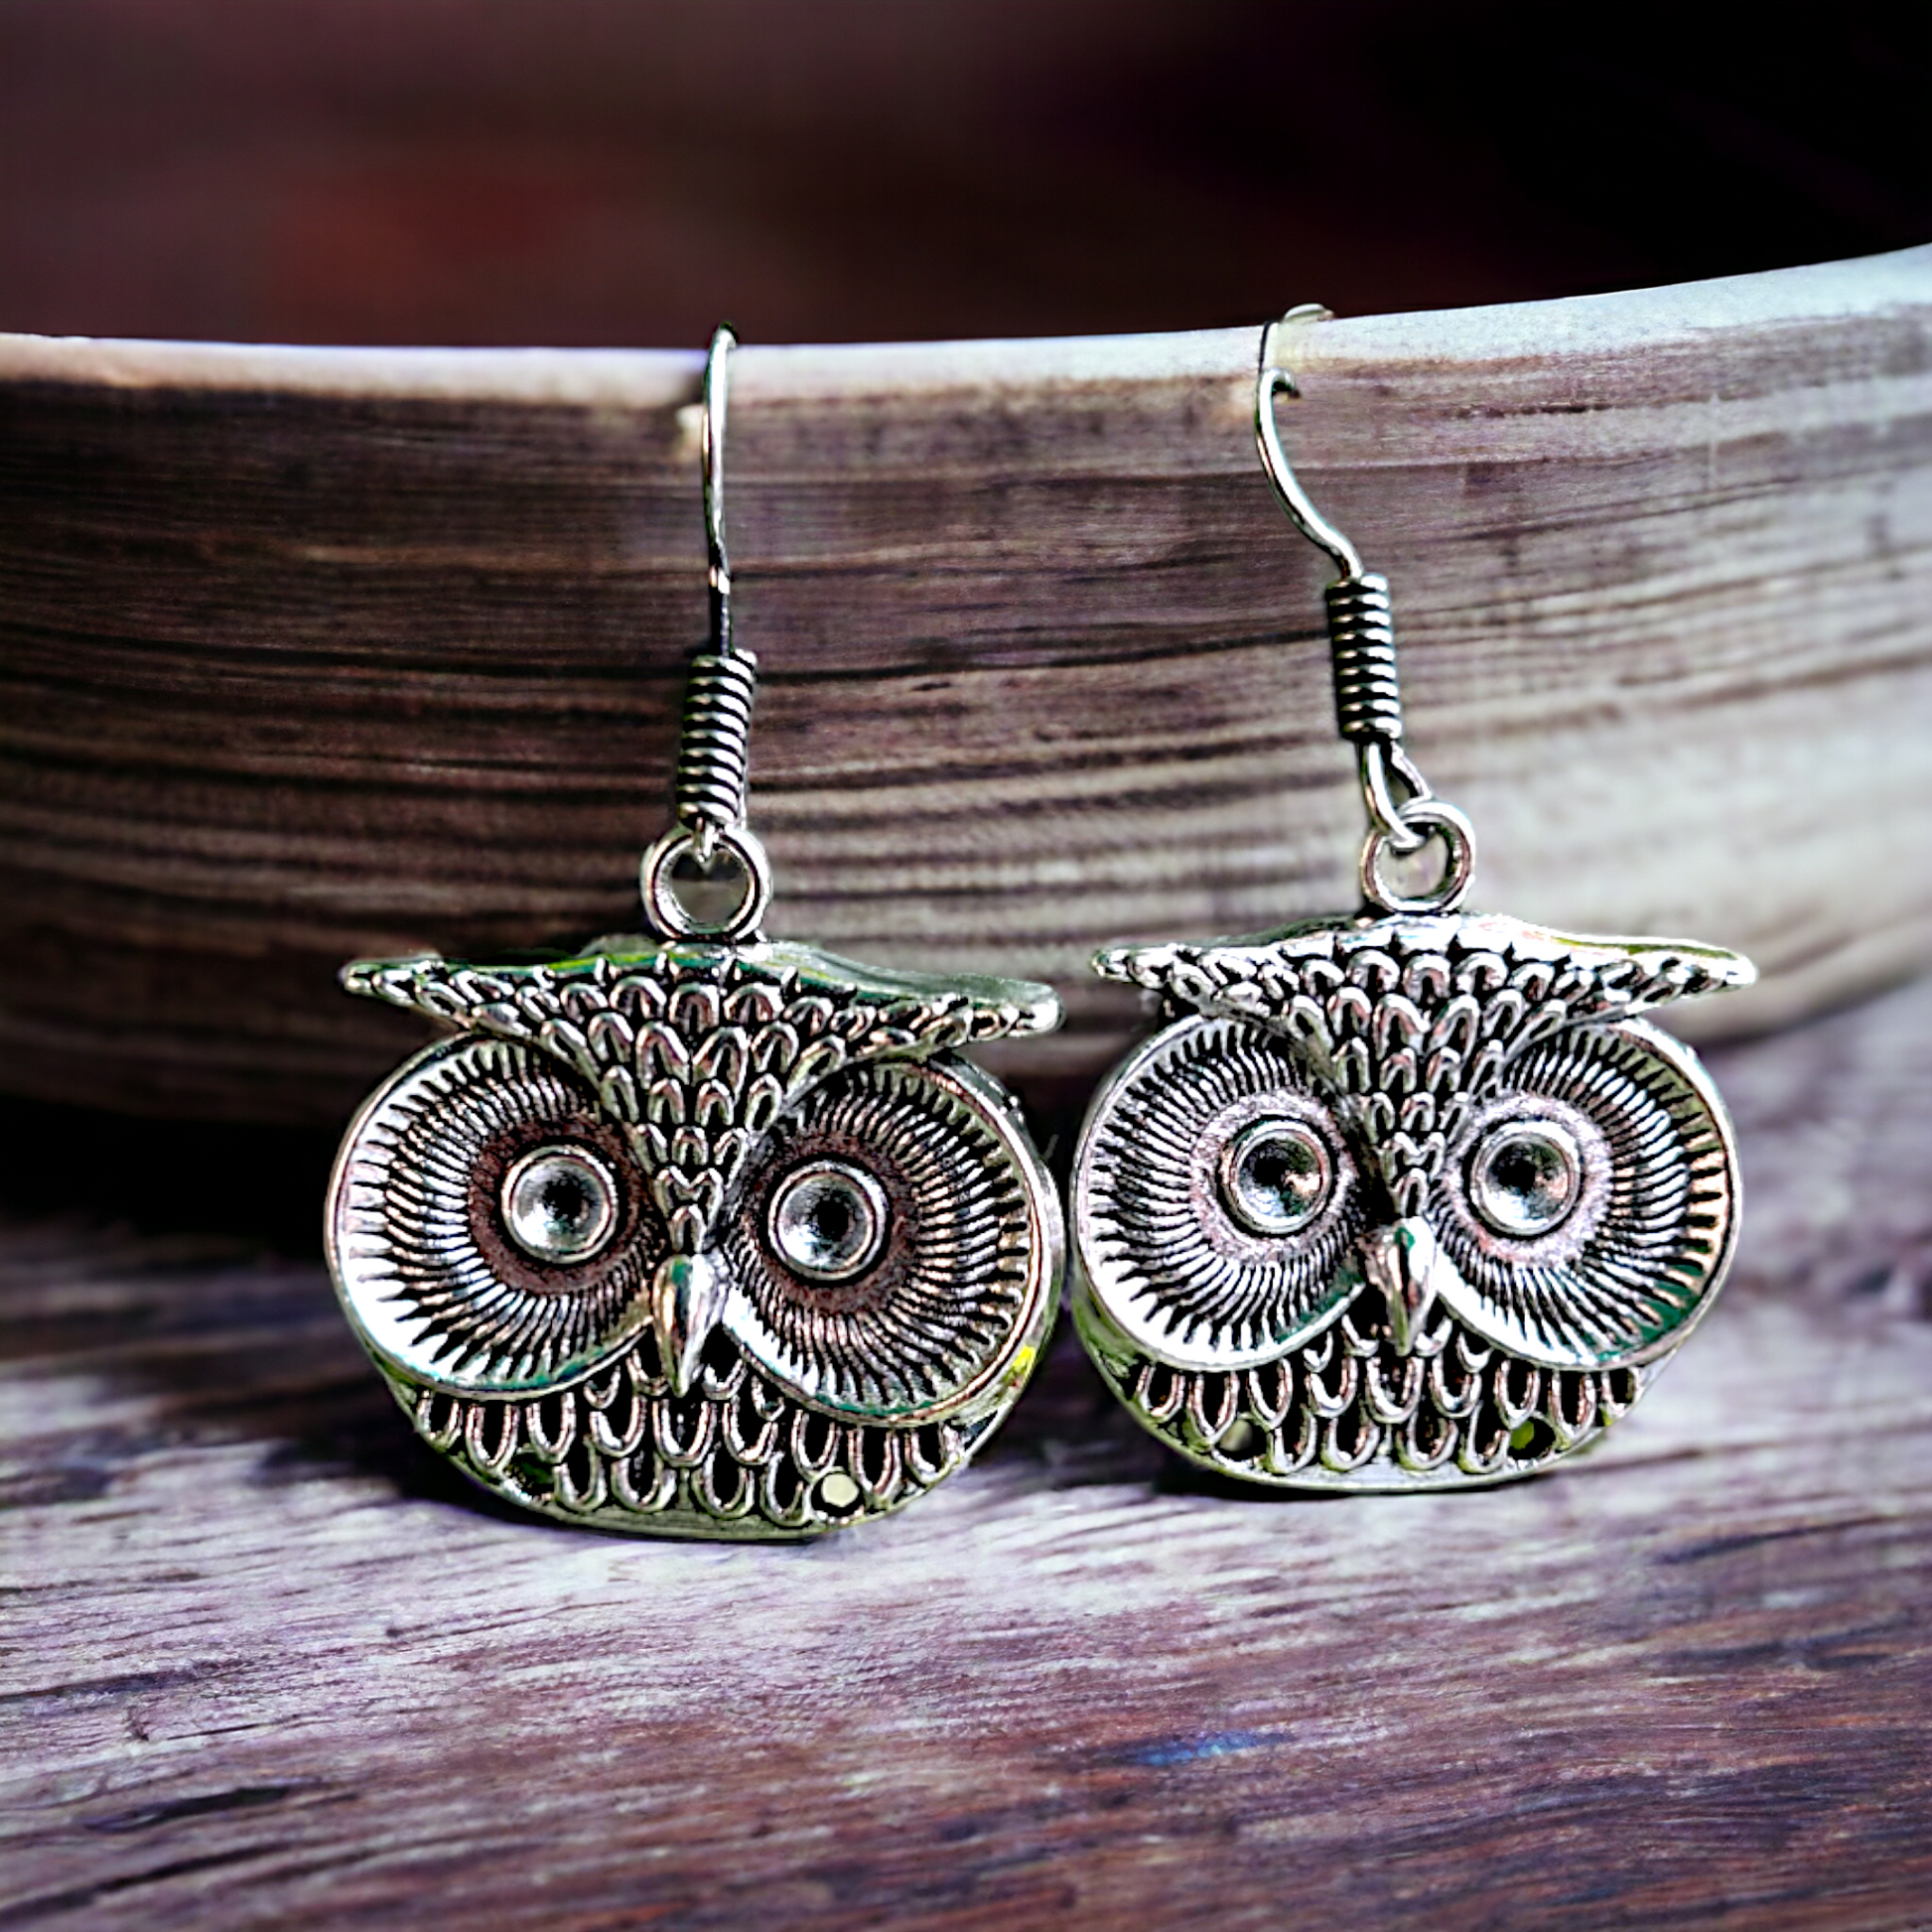 "Vyoma Big Owl Figure Earring – Artistry in Nature's Form, Affordable Enchantment"